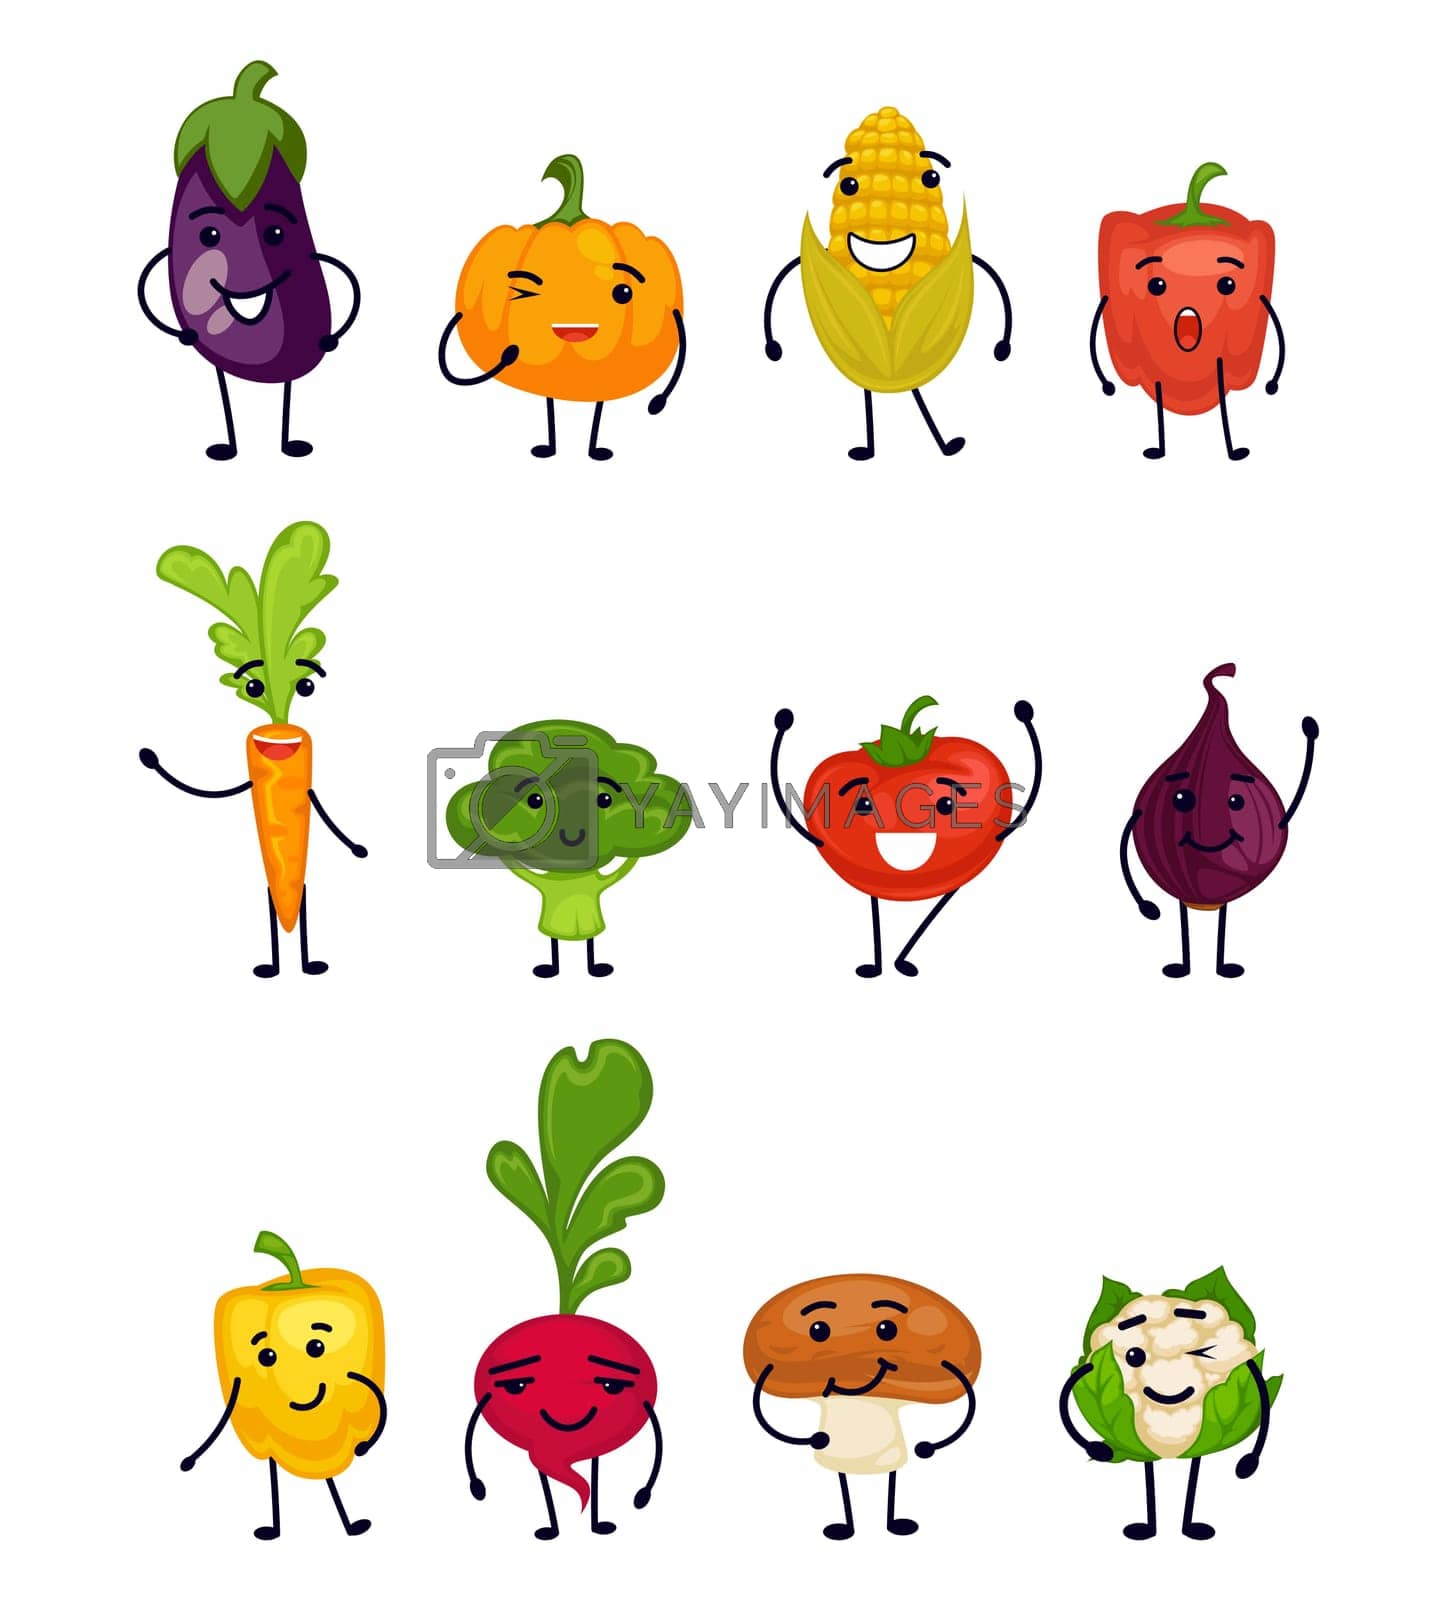 Royalty free image of Cartoon natural food character collection elements by Sonulkaster